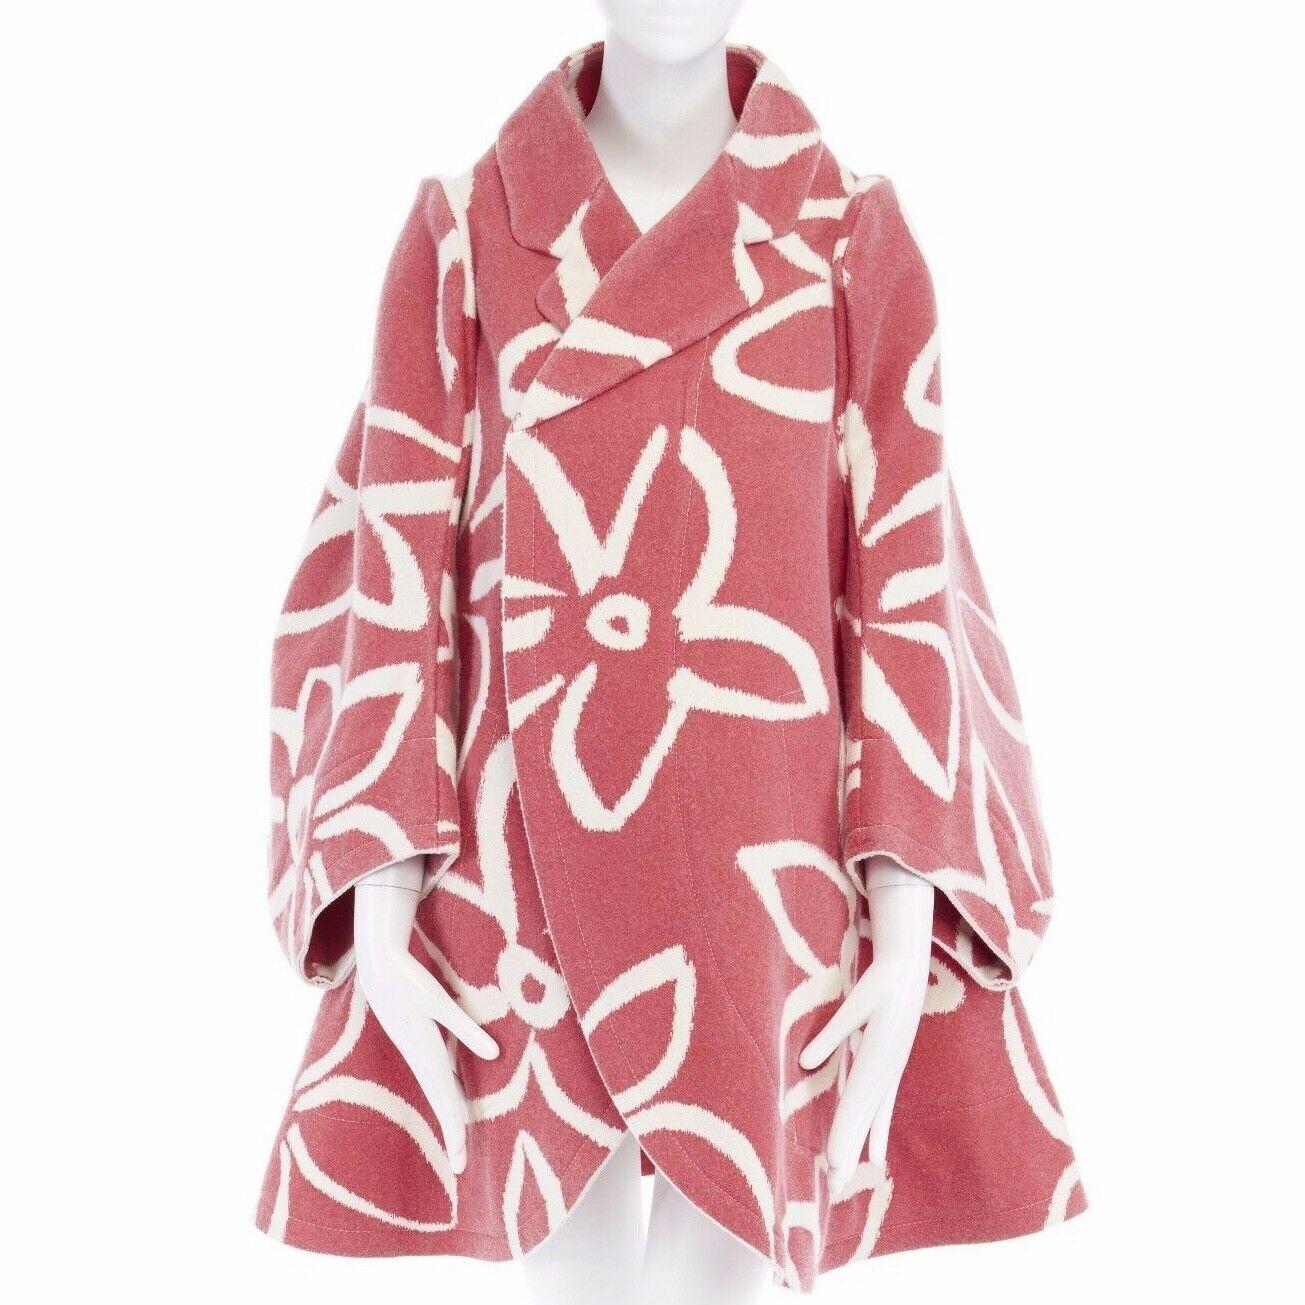 COMME DES GARCONS 
FROM THE FALL WINTER 2012 COLLECTION
Nylon, cotton, wool • Pink base with white floral print • Flat packed design • Stiff structured wool-felt • Rounded notched collar • Curved-cut sleeves • Protruding shoulders • White stitching